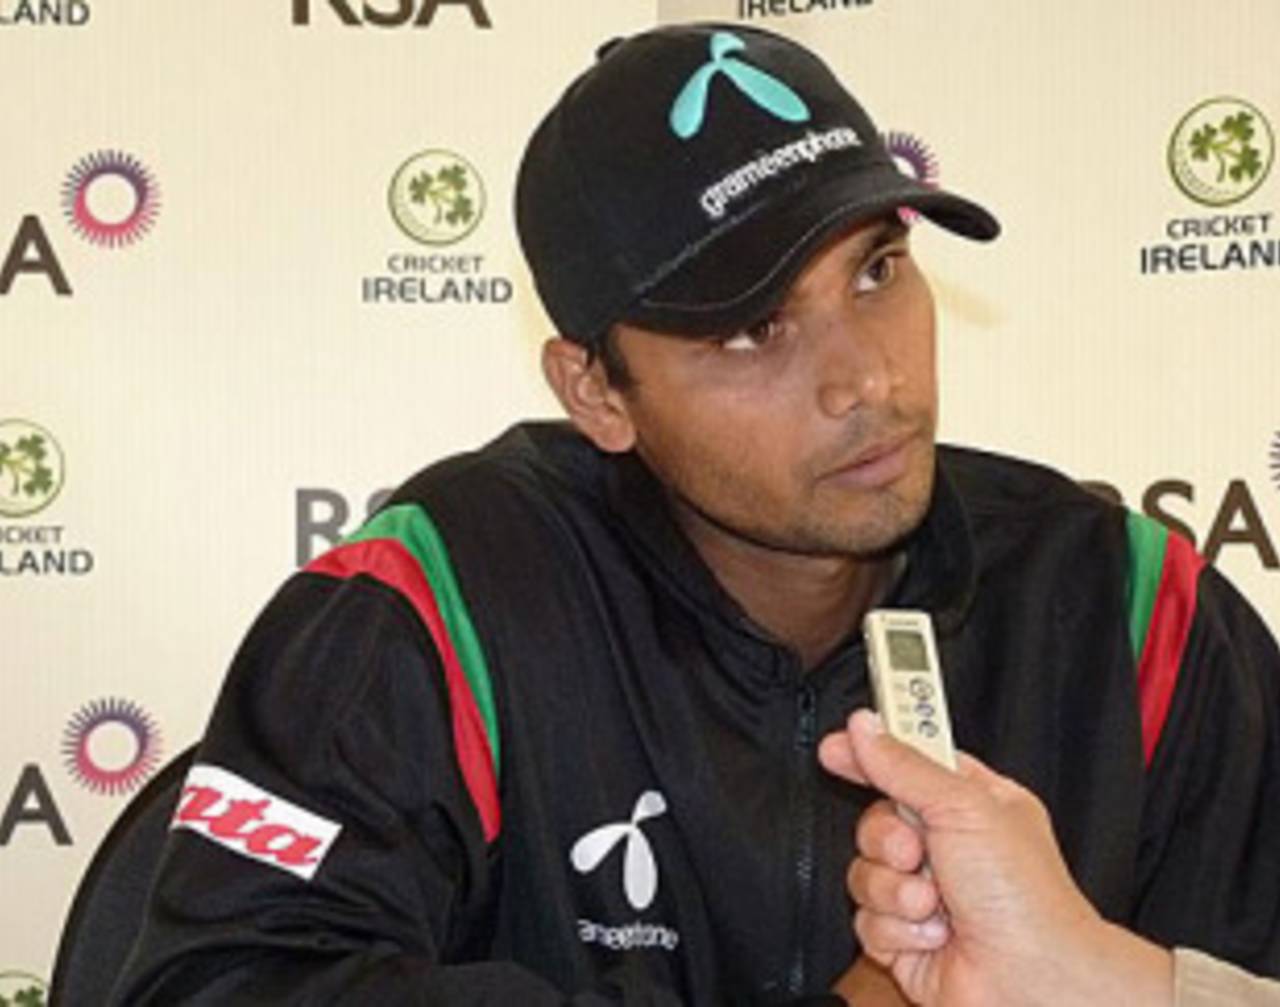 Mashrafe Mortaza has been ruled out due to an ankle injury&nbsp;&nbsp;&bull;&nbsp;&nbsp;Grameenphone